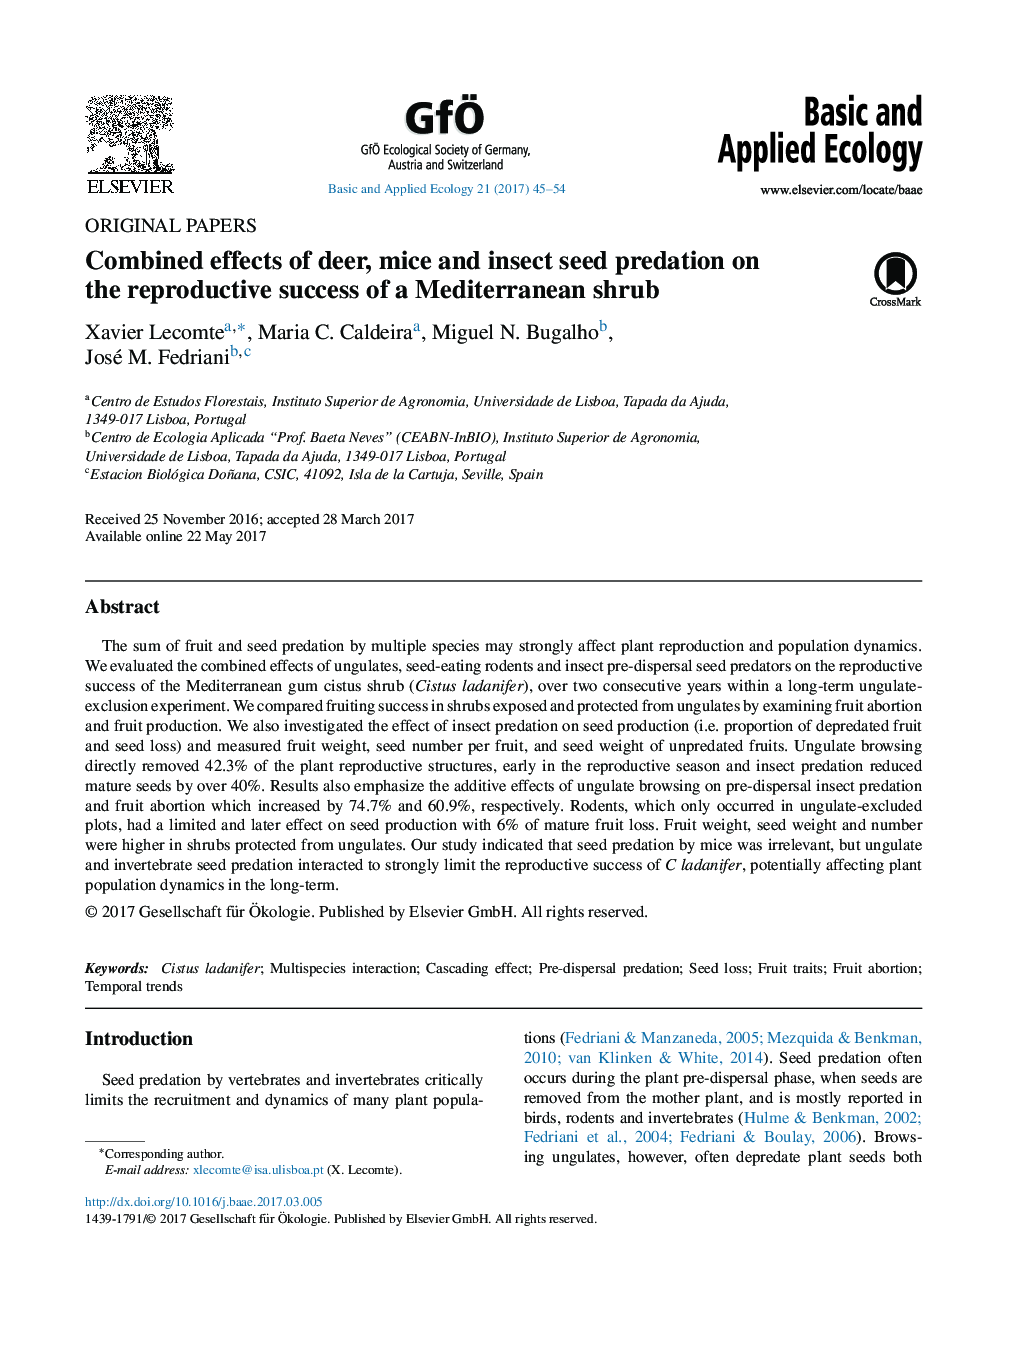 Original PapersCombined effects of deer, mice and insect seed predation on the reproductive success of a Mediterranean shrub